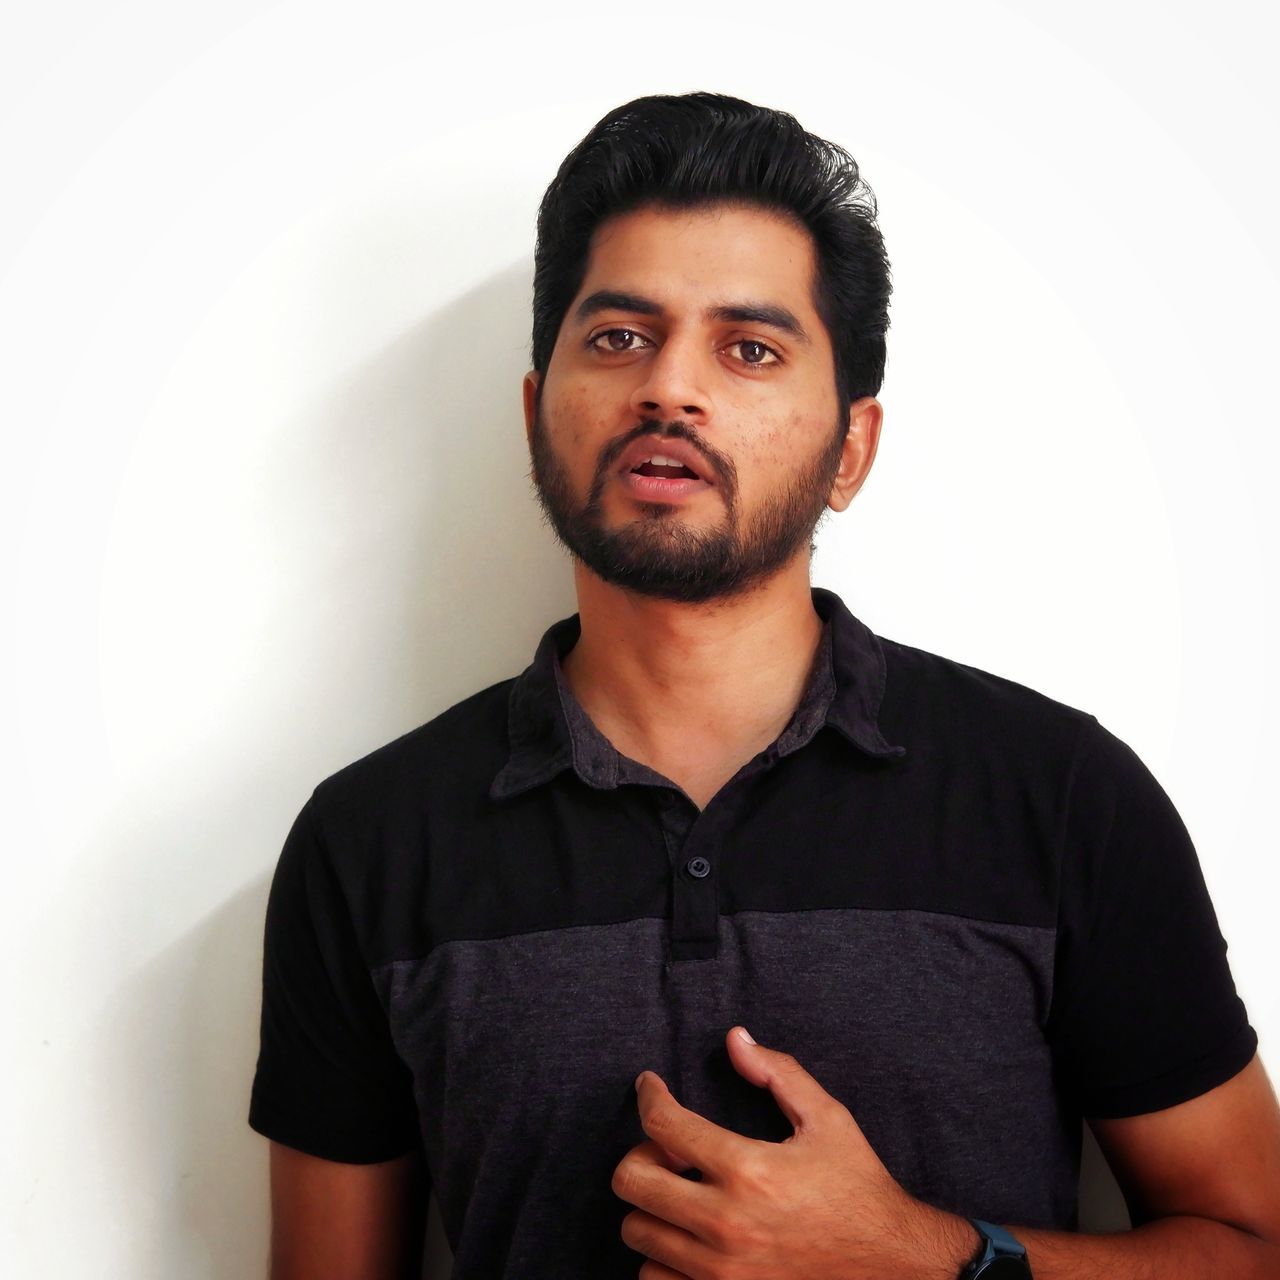 one person, portrait, beard, adult, men, facial hair, looking at camera, casual clothing, young adult, indoors, waist up, studio shot, sleeve, front view, t-shirt, white background, standing, hairstyle, looking, clothing, collar, person, serious, photo shoot, black hair, emotion, cool attitude, relaxation, stubble, copy space, black, arms crossed, polo shirt, lifestyles, individuality, contemplation